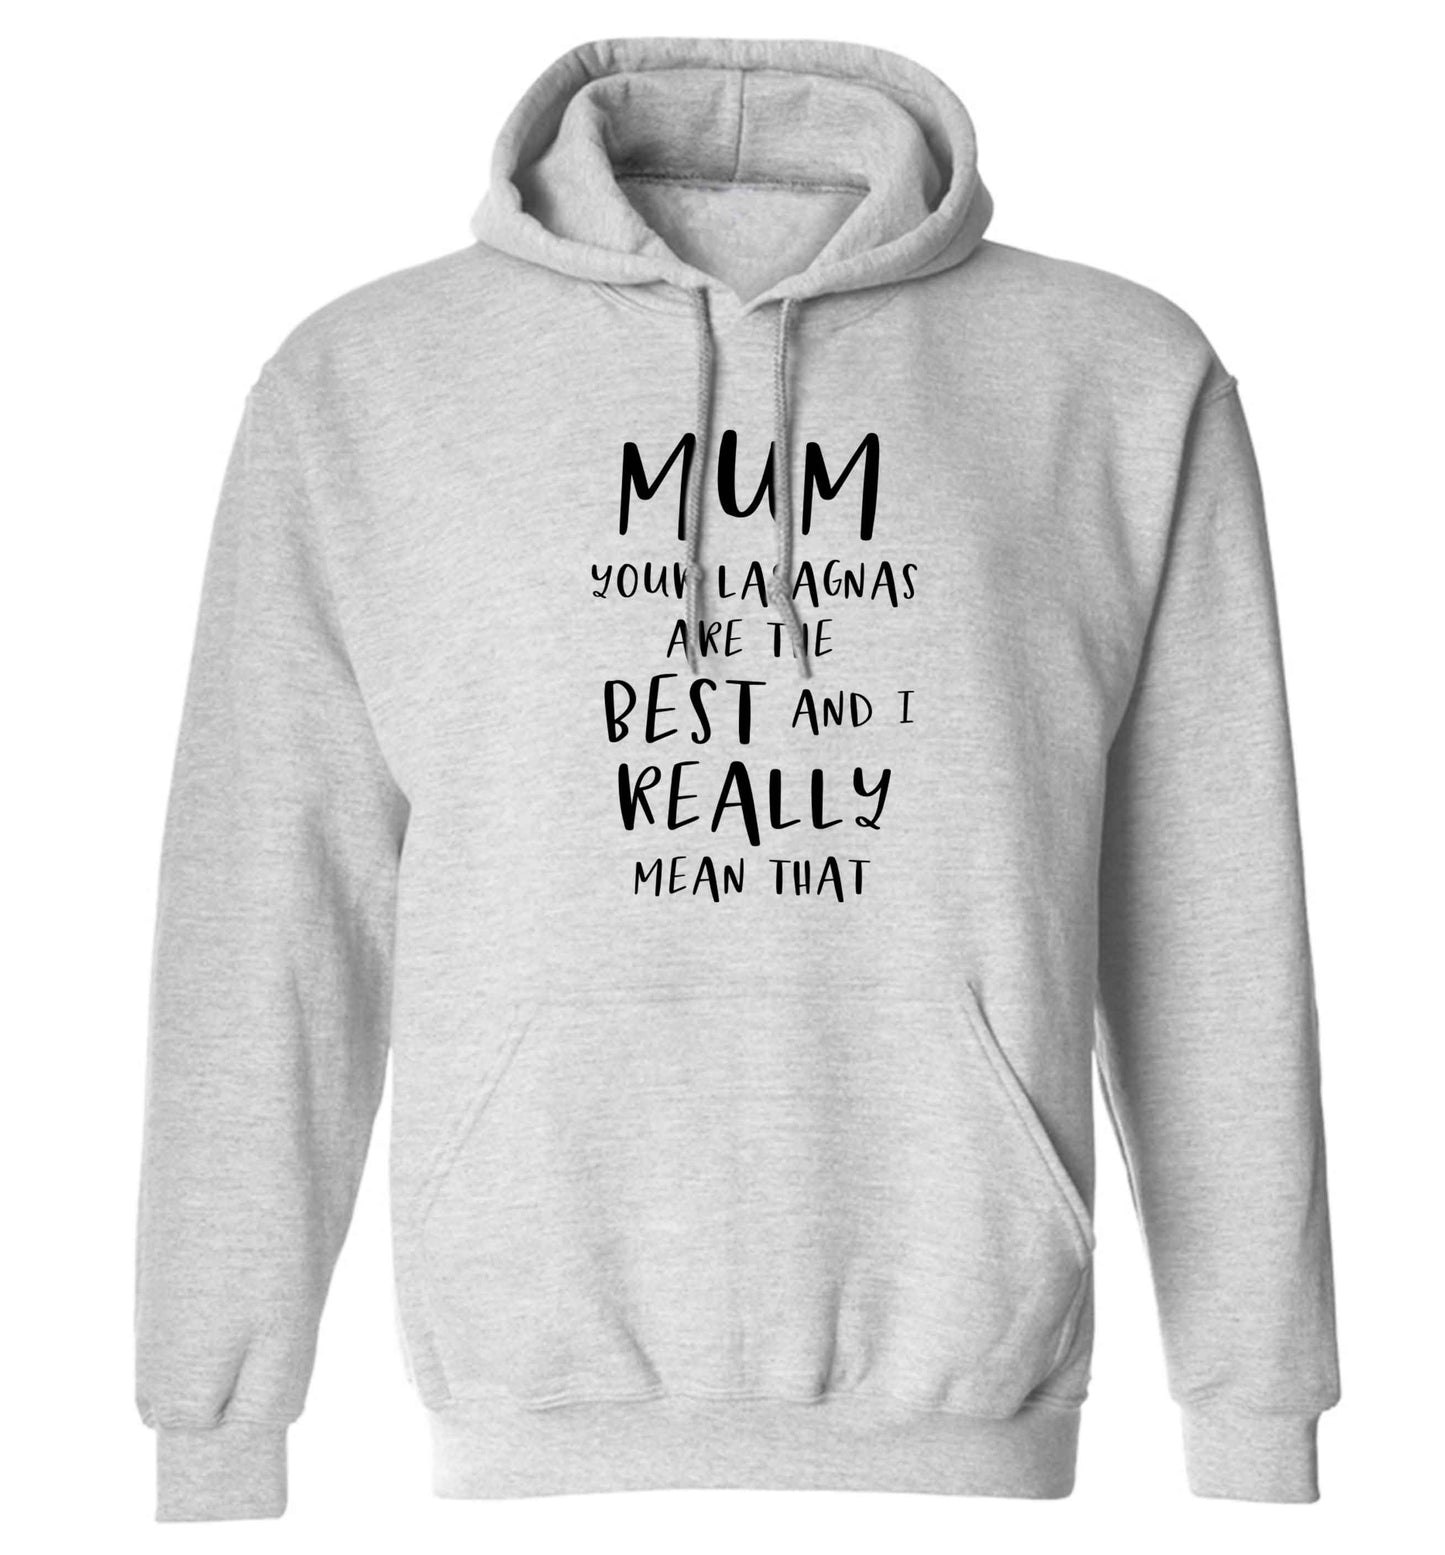 Funny gifts for your mum on mother's dayor her birthday! Mum your lasagnas are the best and I really mean that adults unisex grey hoodie 2XL